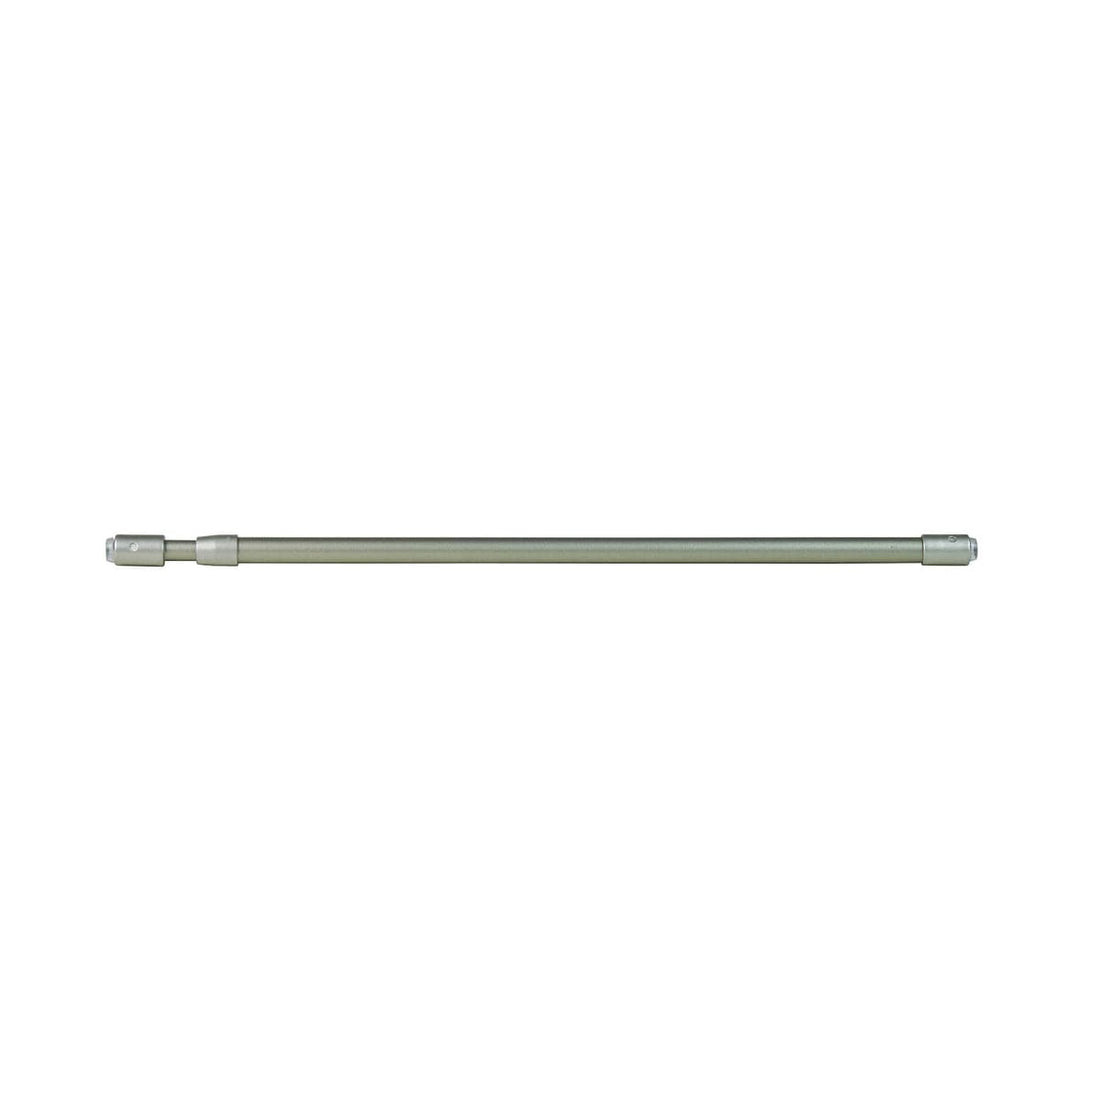 DAHLIA CURTAIN ROD WITH 50/80 NICKEL EXTENSIBLE PRESSURE POINT - best price from Maltashopper.com BR480009714